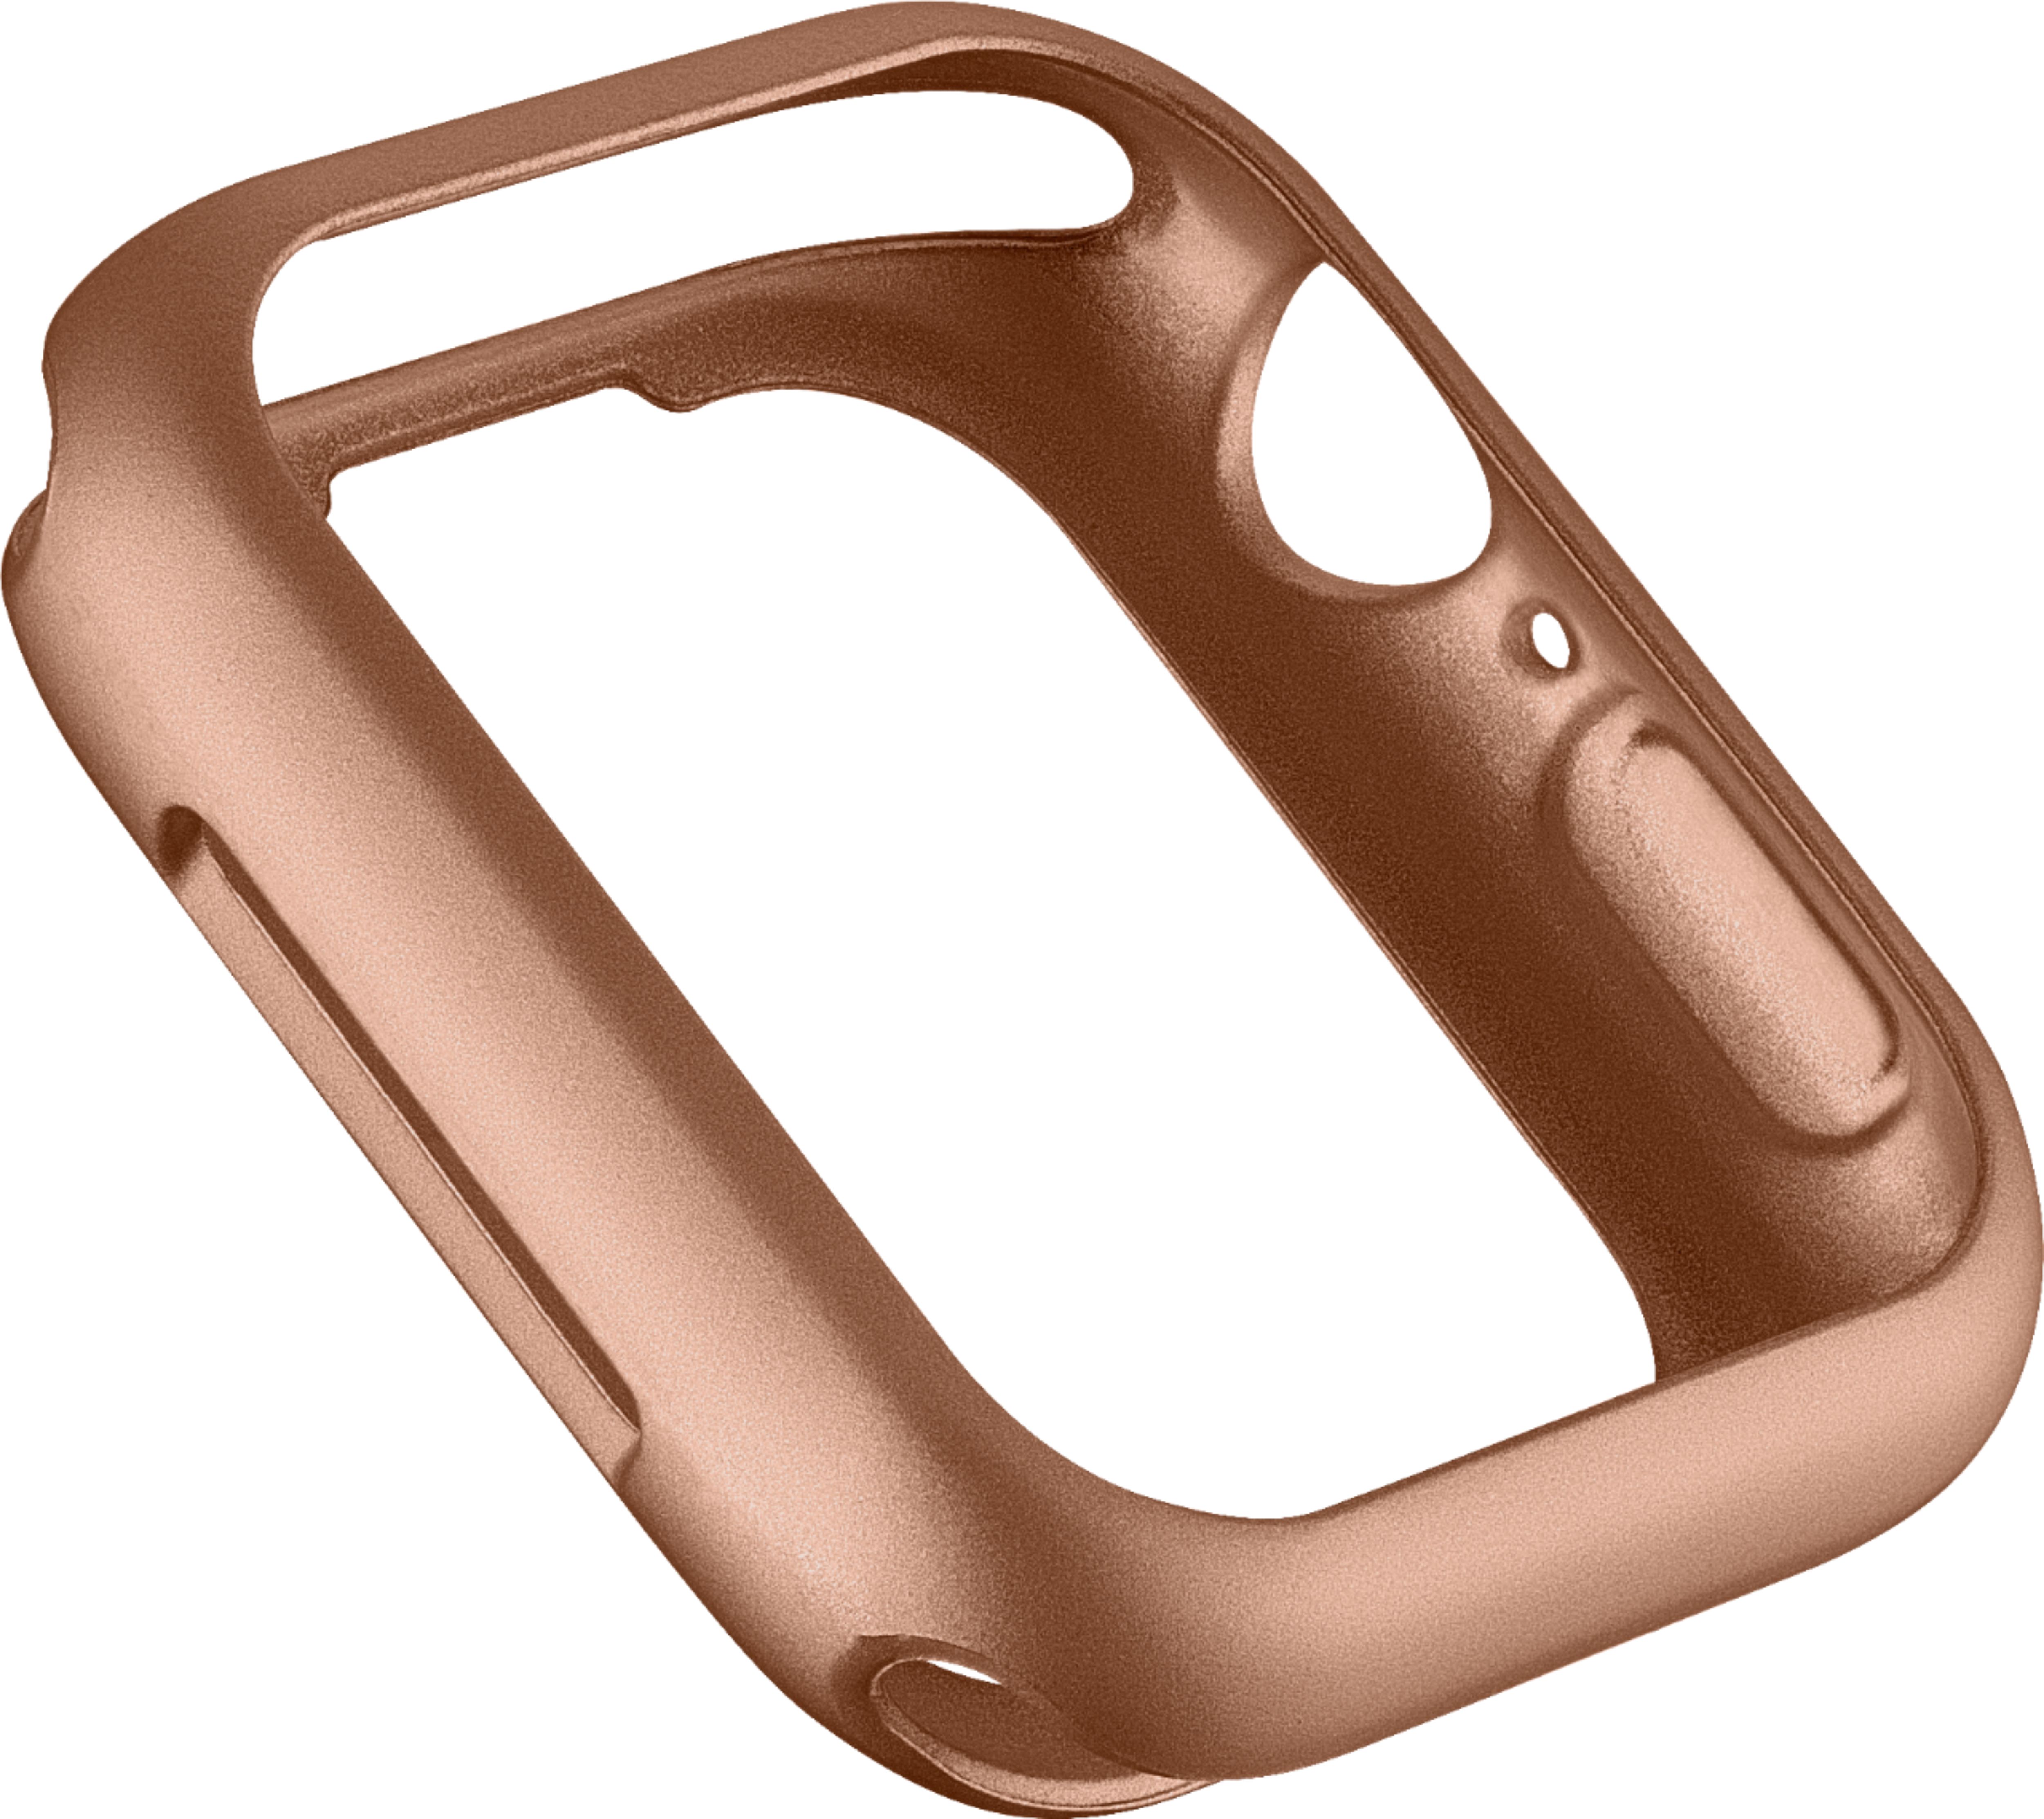 Angle View: Apple Watch Series 6 (GPS + Cellular) 44mm Gold Aluminum Case with Pink Sand Sport Band - Gold (Verizon)